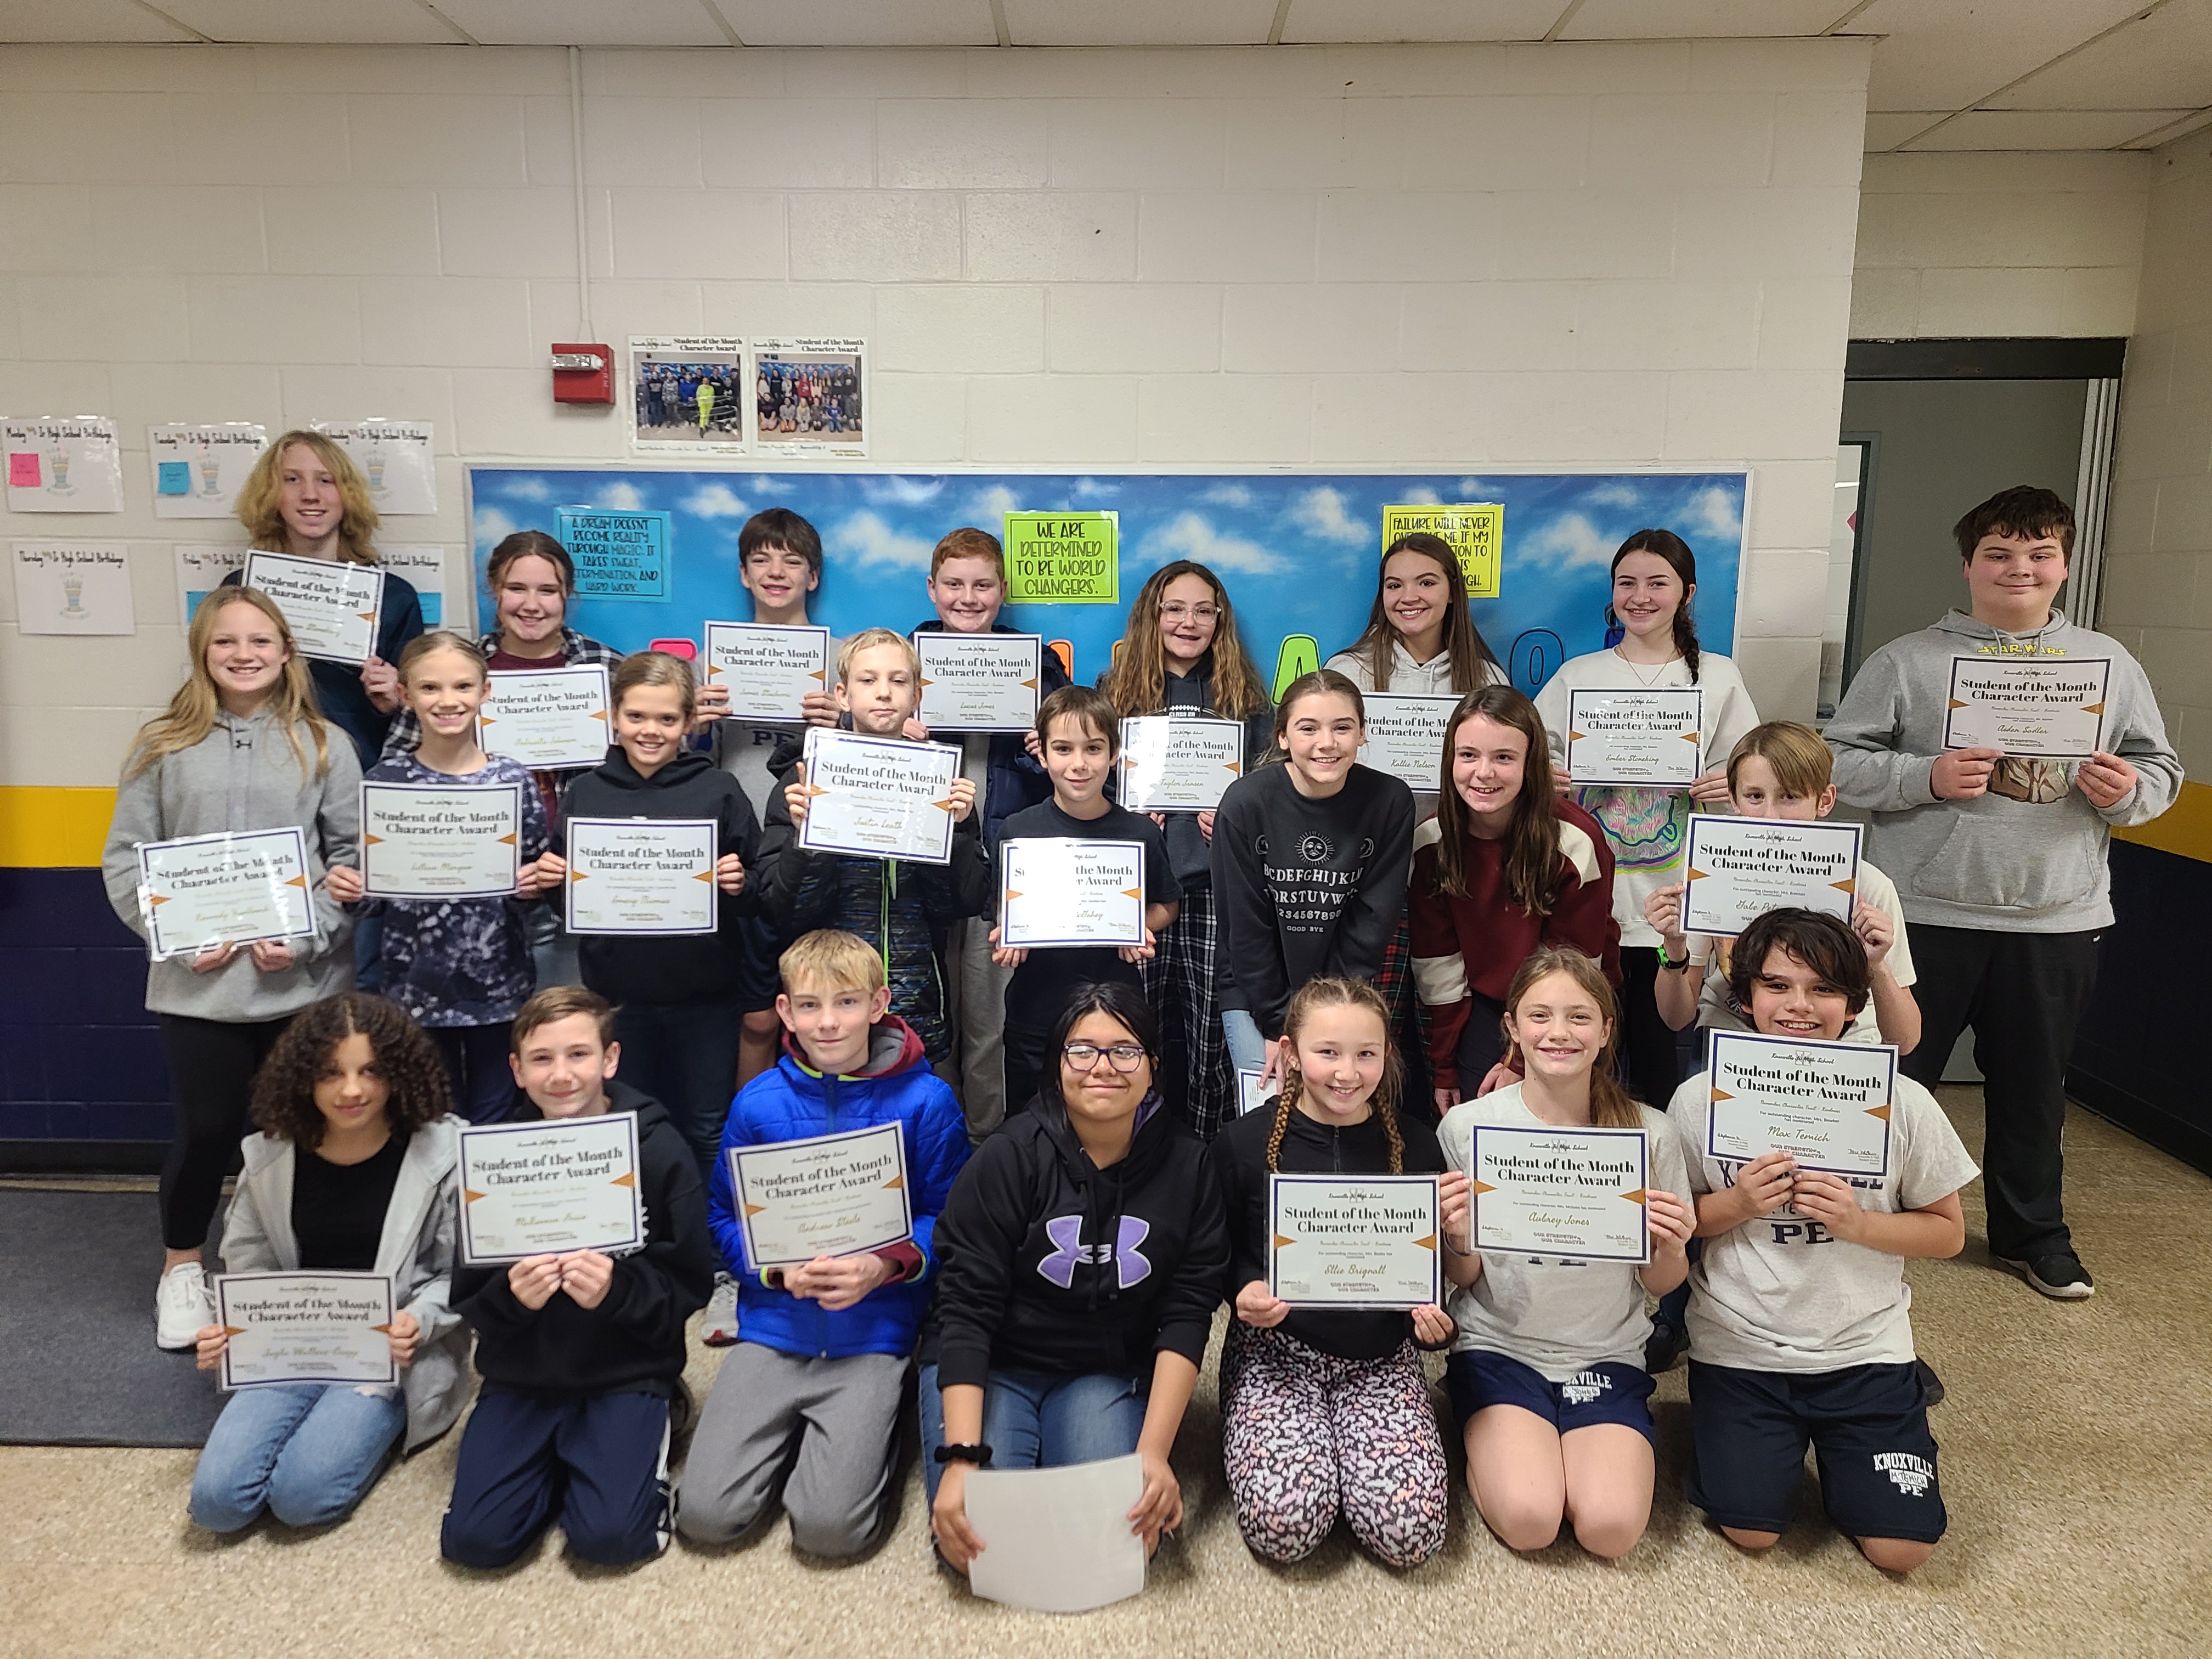 November Students of the Month Character Award for Kindness